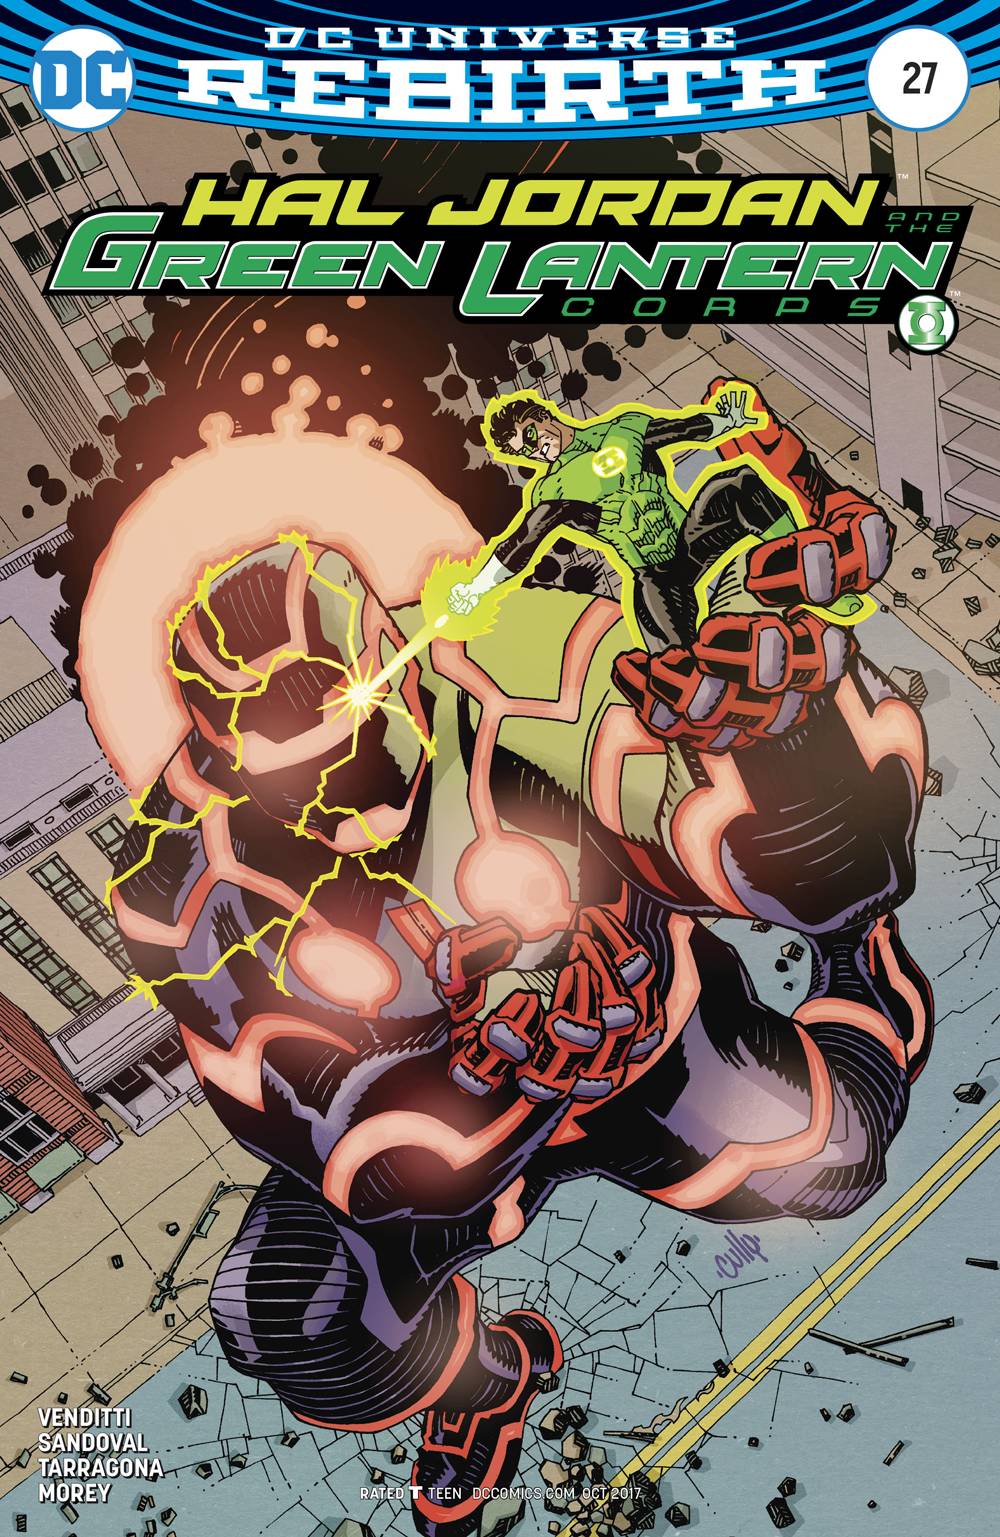 Hal Jordan and the Green Lantern Corps #27 Variant Edition (2016)